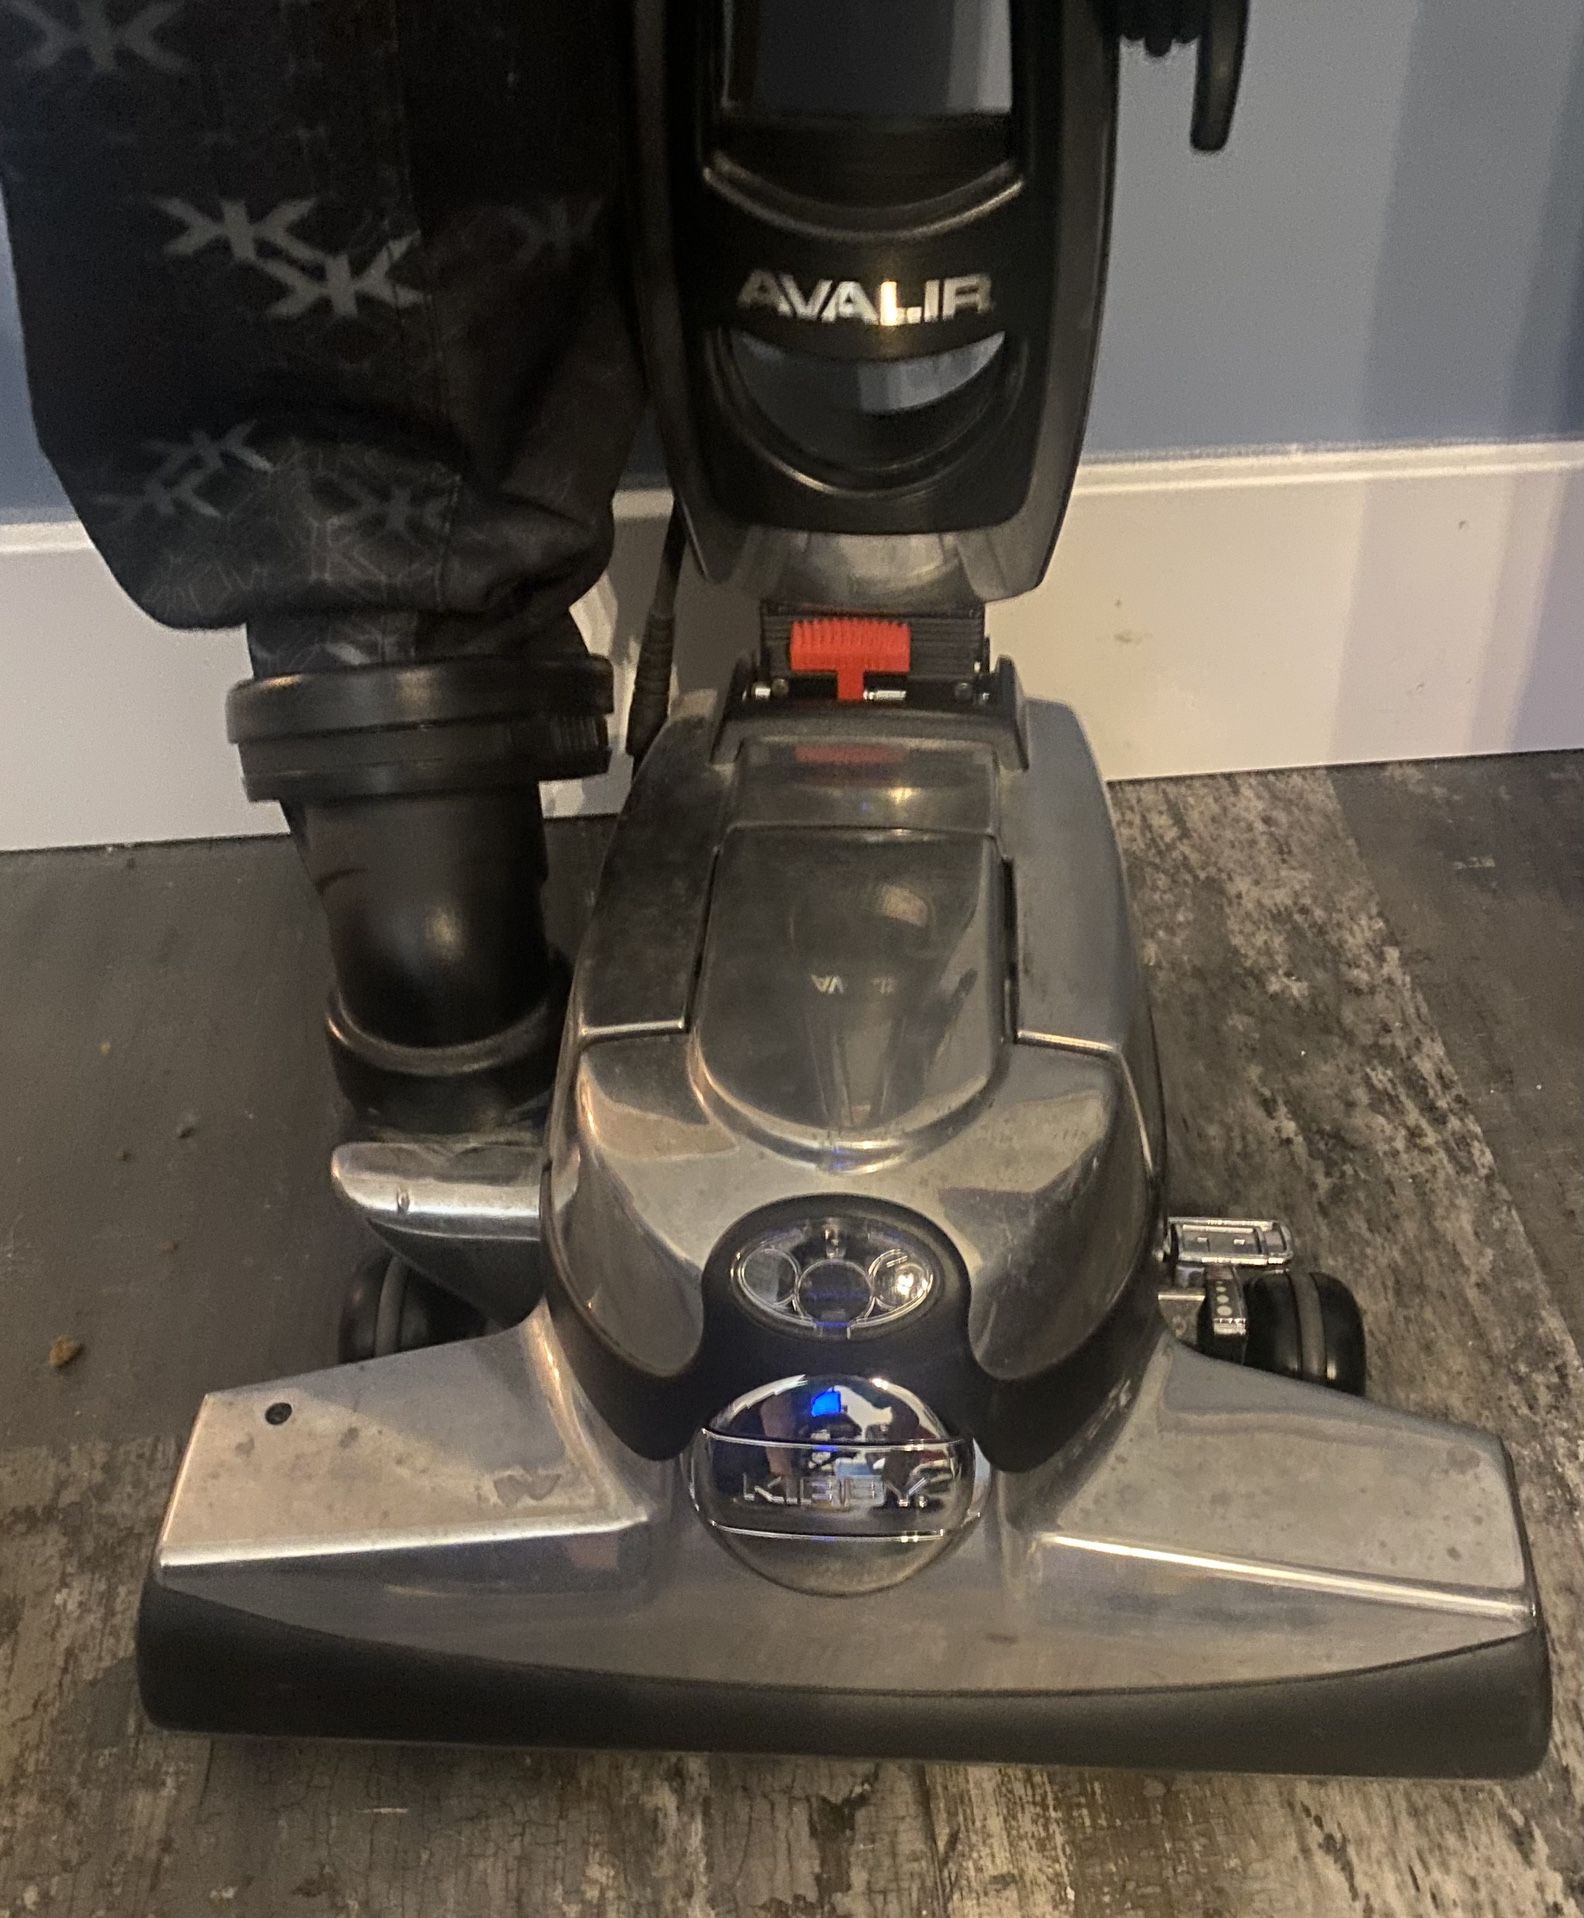 Kirby Avalir G10D Vacuum And More! 